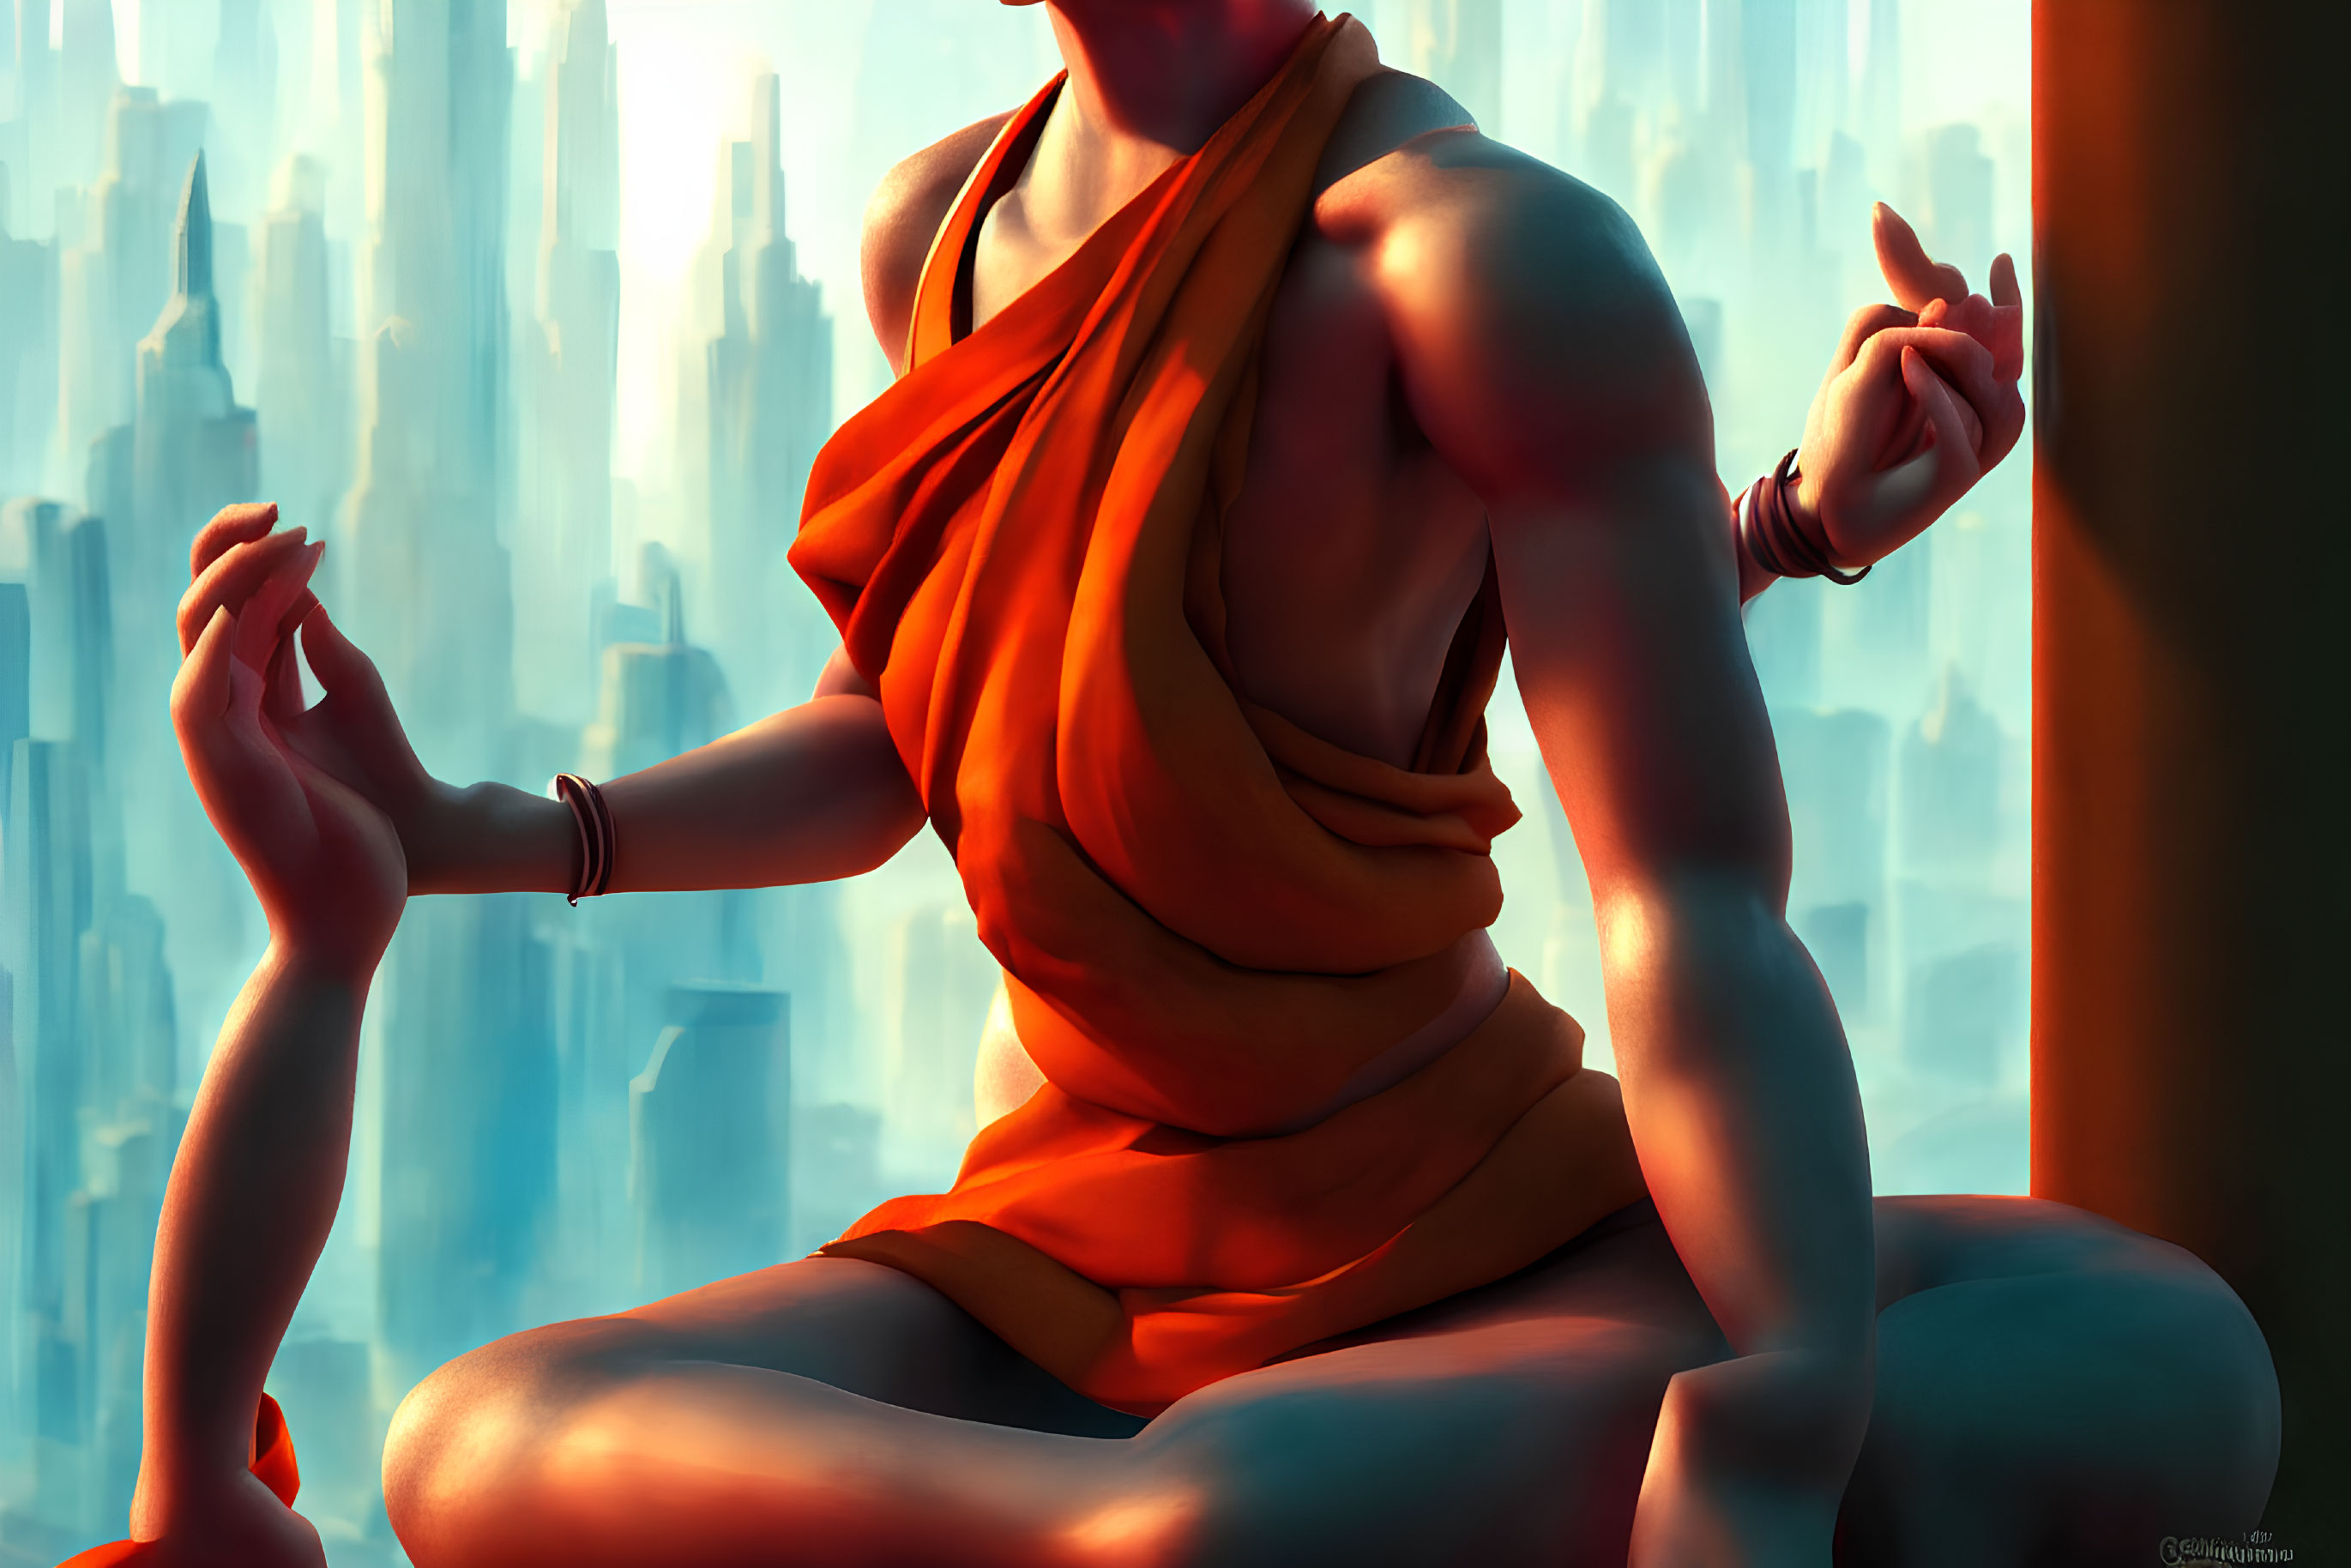 Person meditating in lotus pose with orange cloth in front of futuristic skyscrapers.